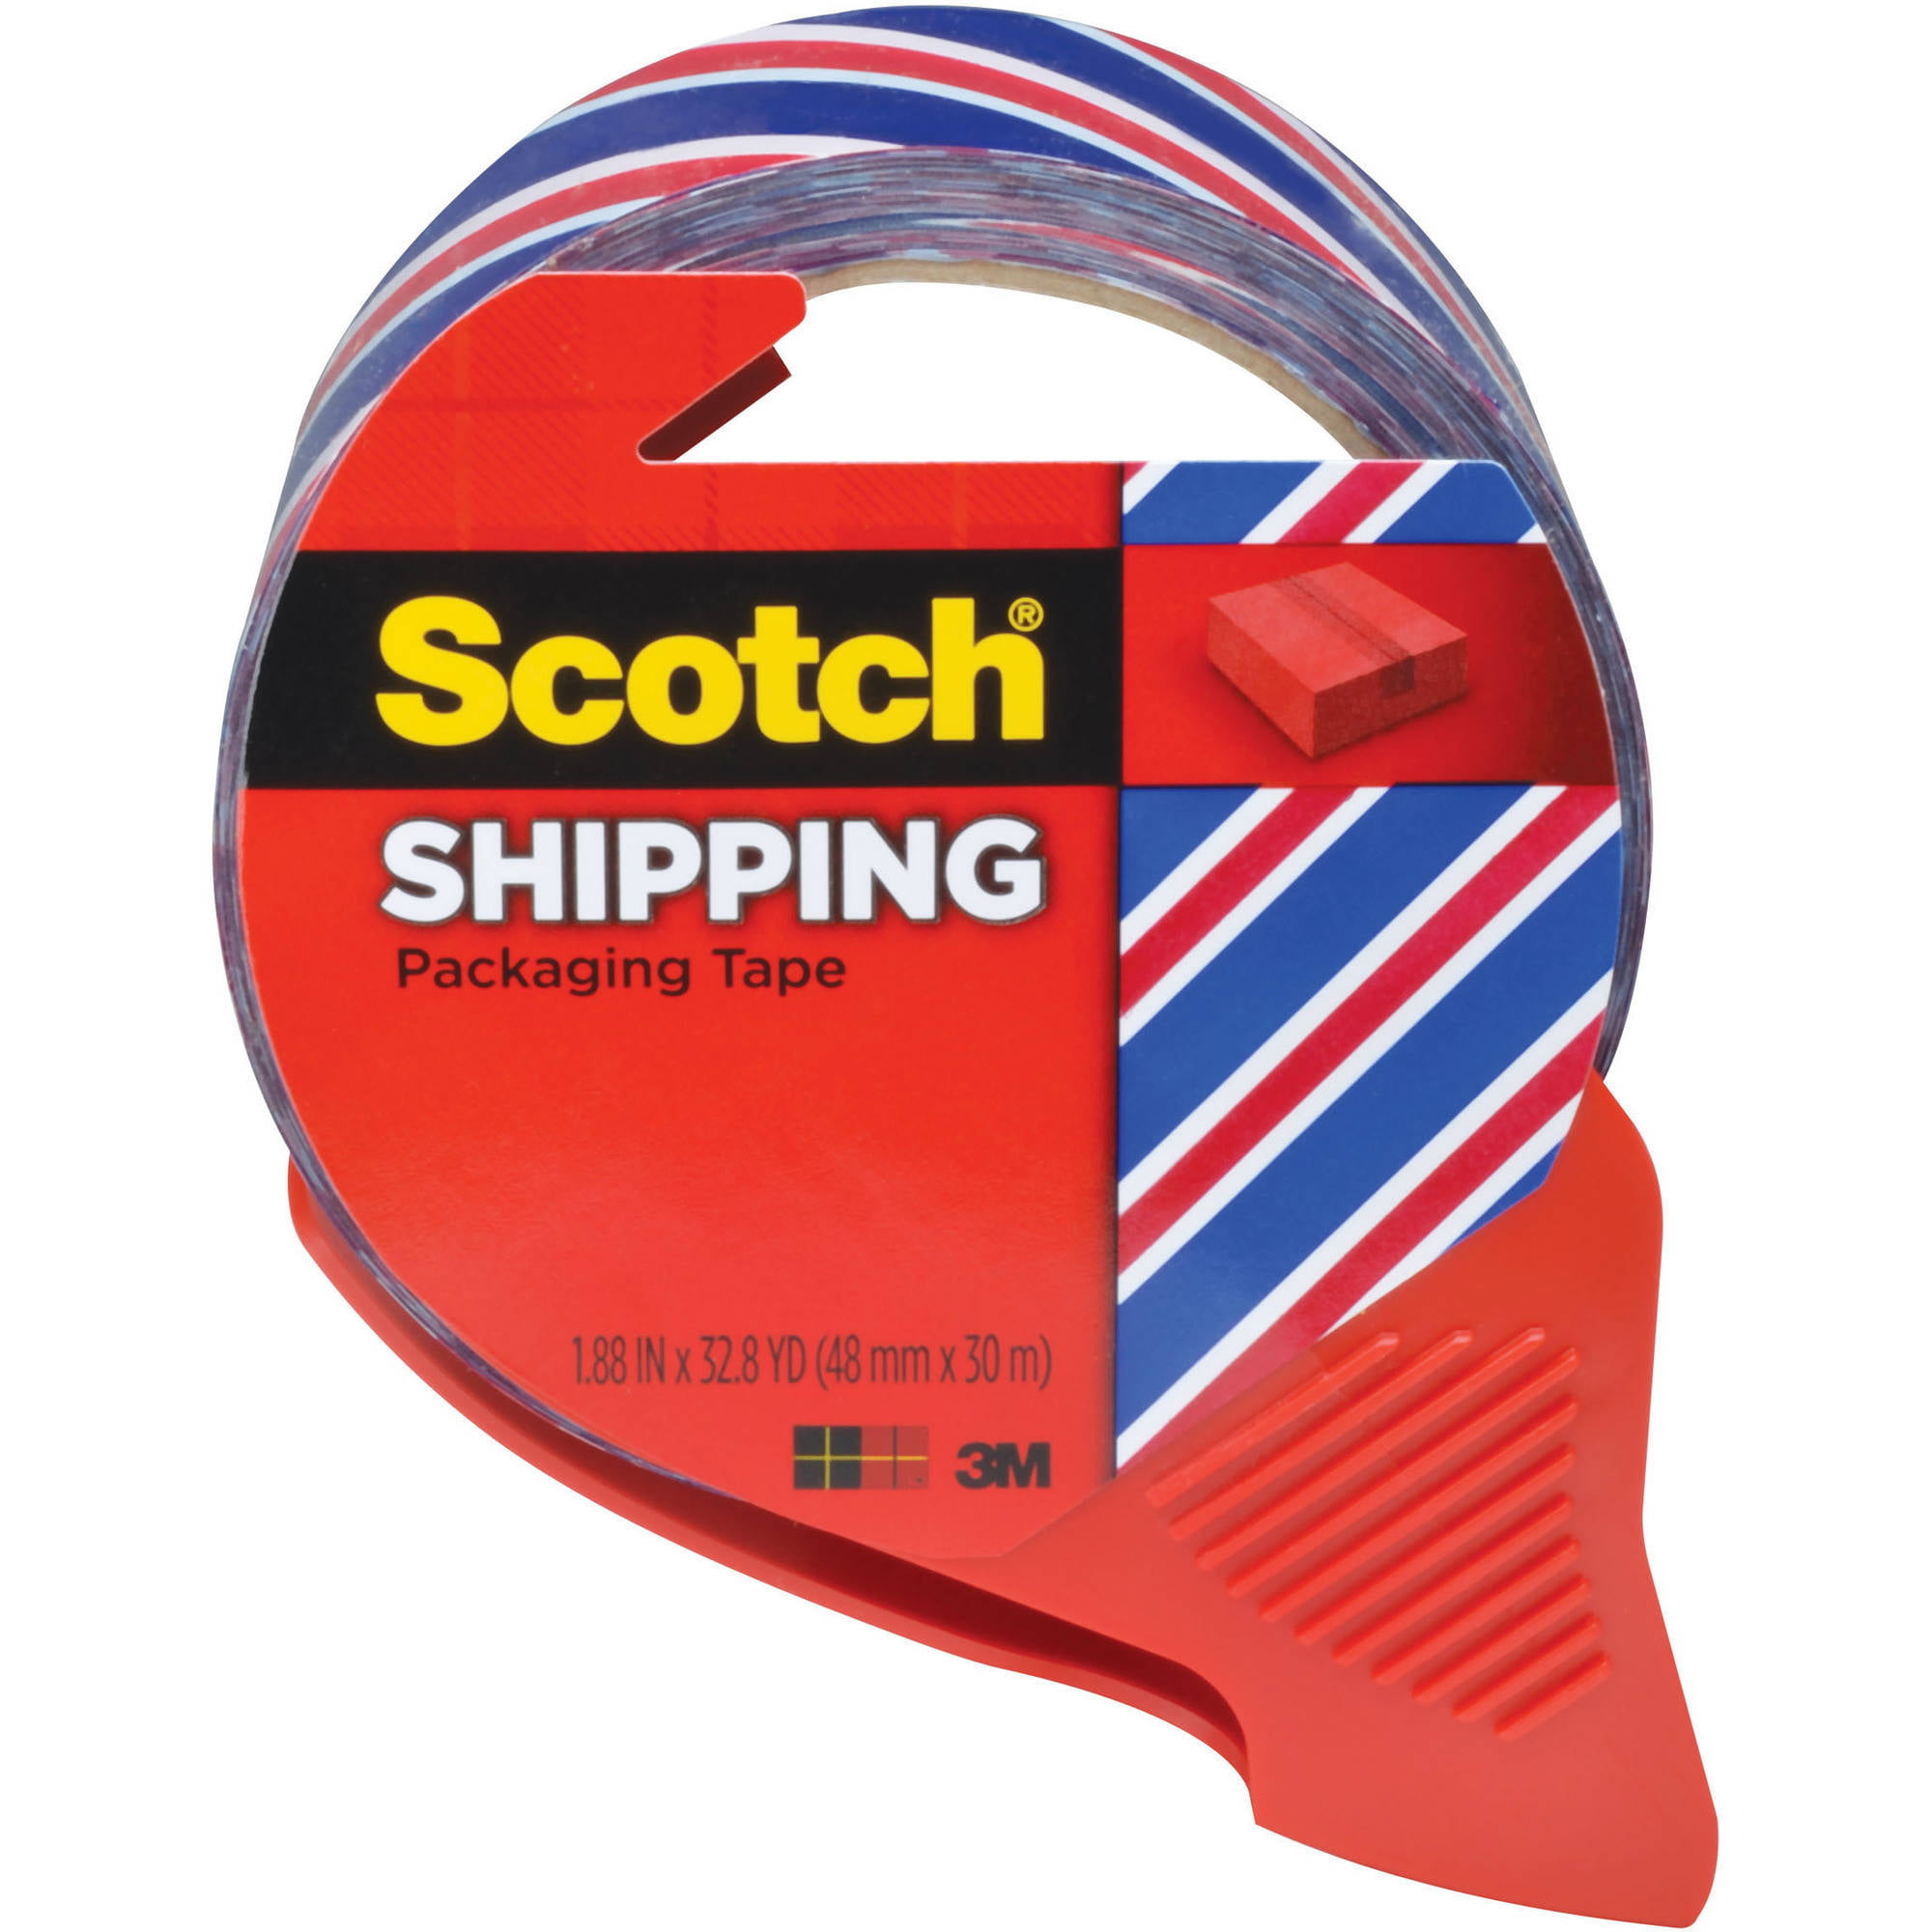 3M Scotch 1.88 in. x 60.1 yds. Heavy Duty Masking Tape (3-Rolls/Pack)  2020+48EP3 - The Home Depot